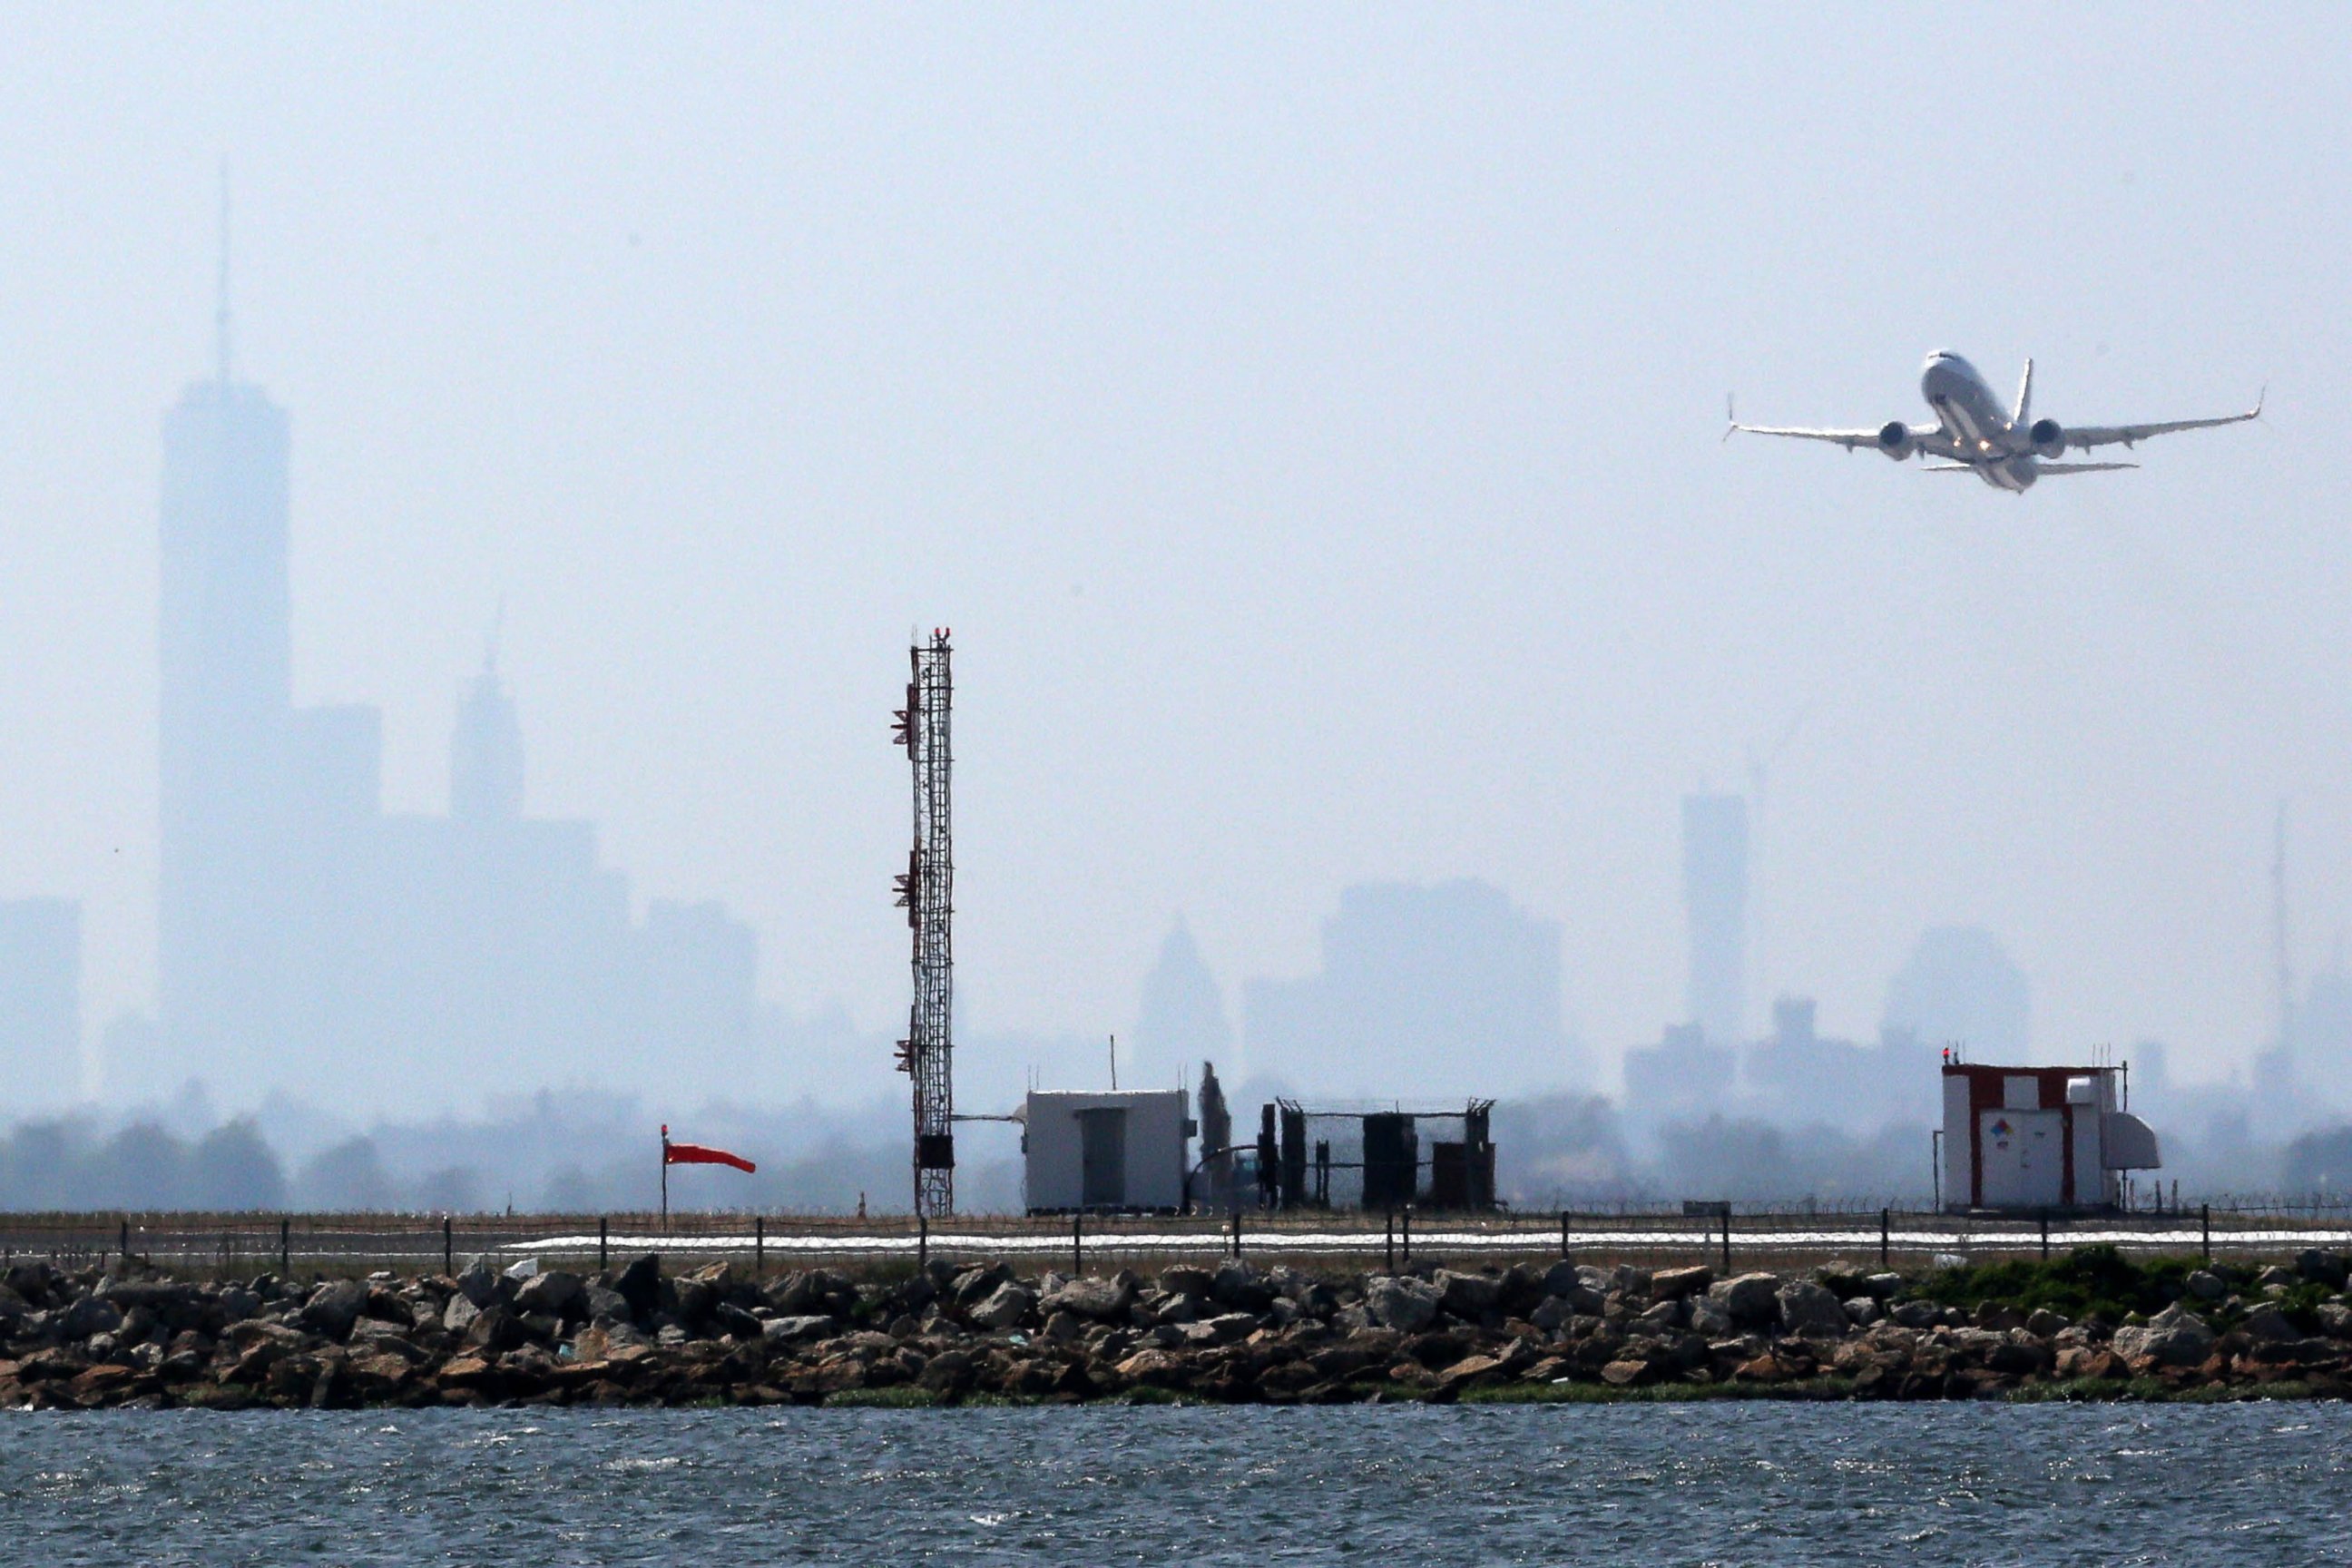 PHOTO: An aircraft takes off from New York's John F. Kennedy Airport against a hazy backdrop of the New York skyline, May 25, 2015. 